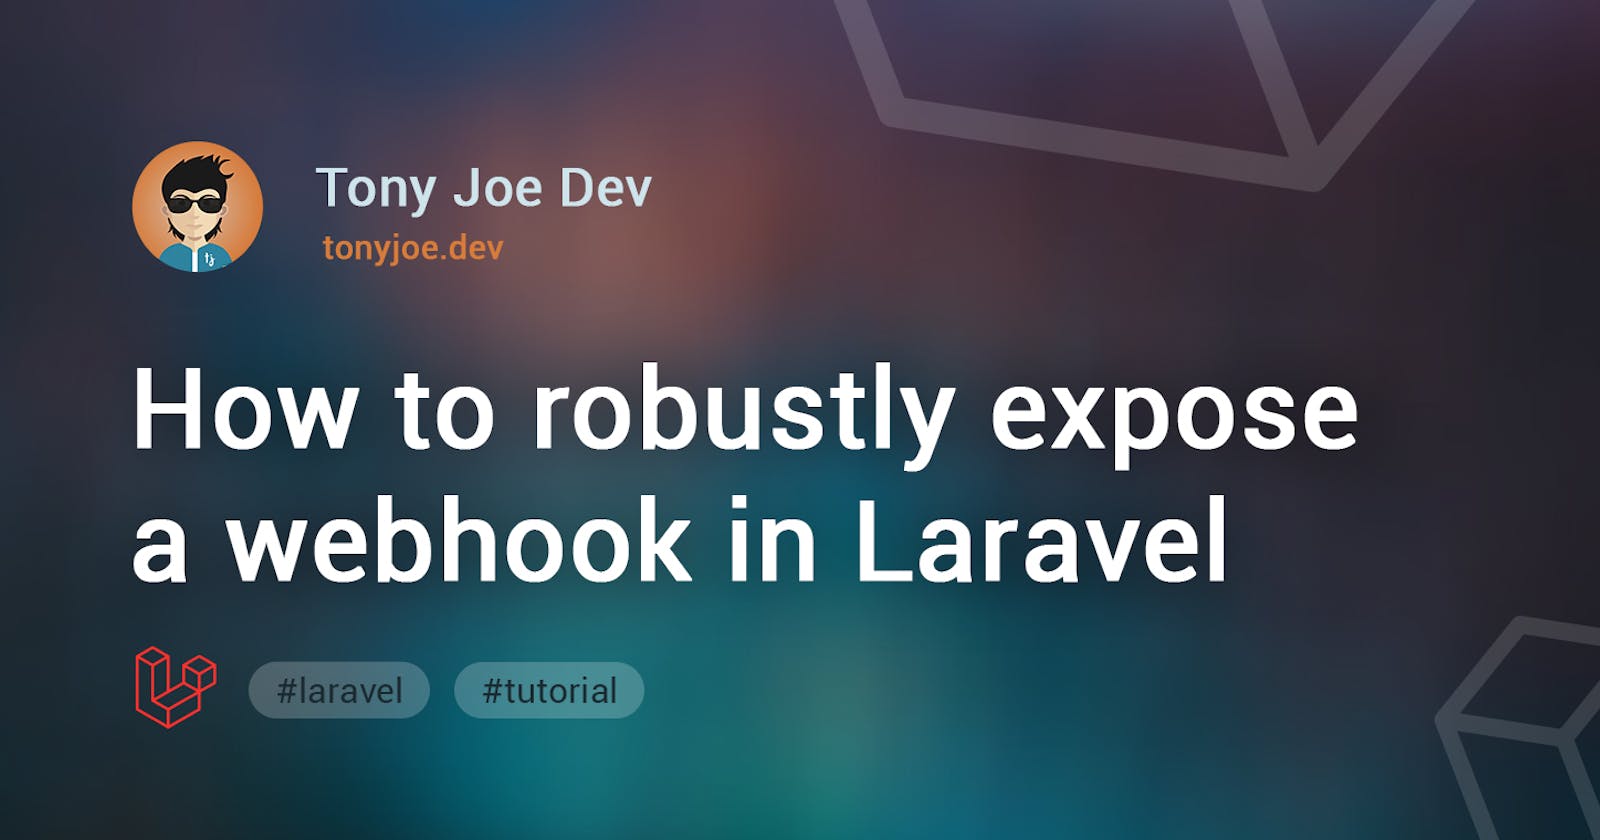 How to robustly expose a webhook in Laravel